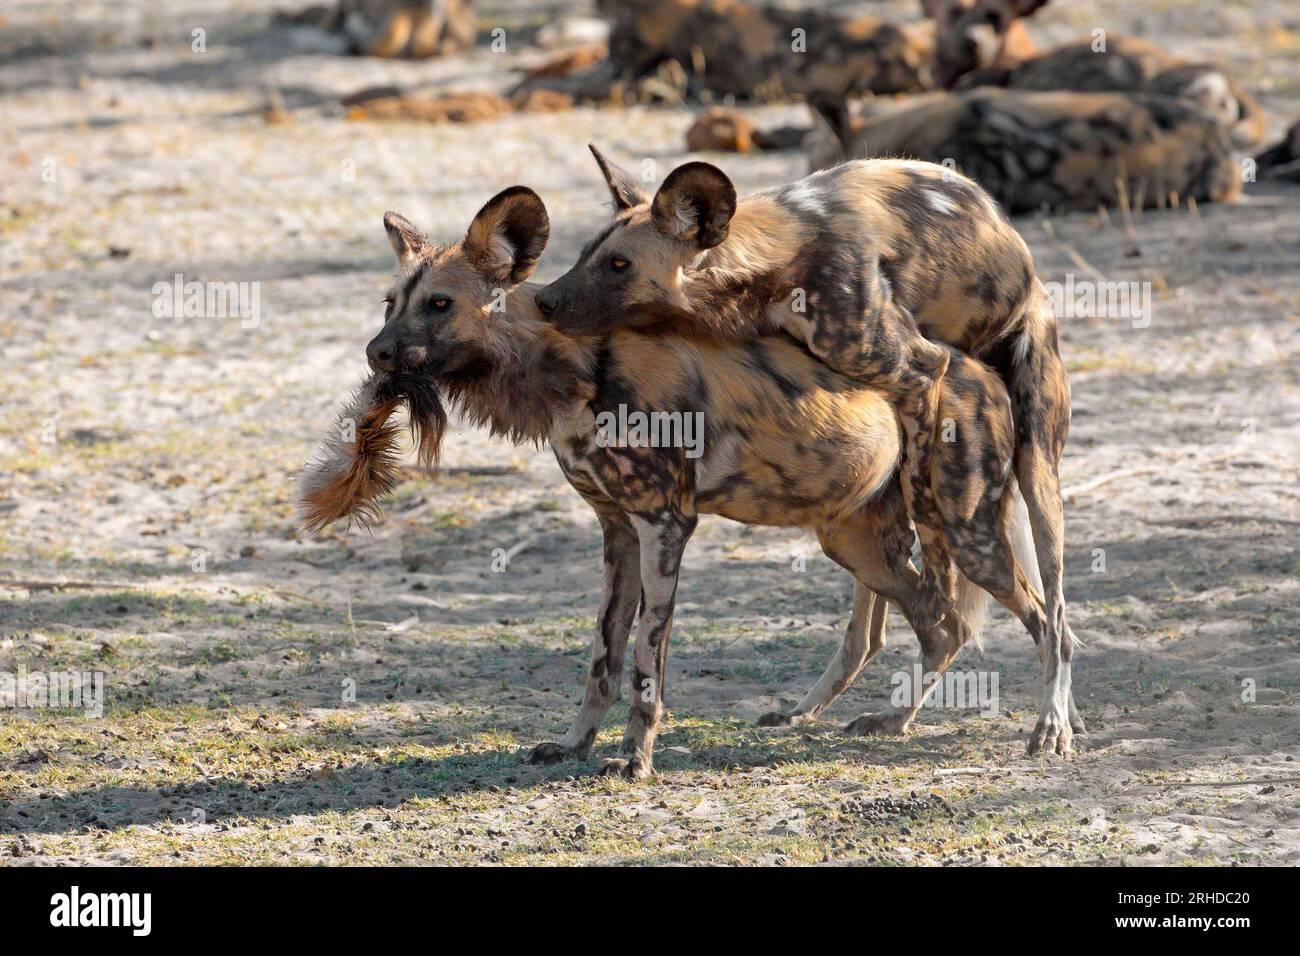 African Wild Dogs, Moremi Game Reserve Stockfoto